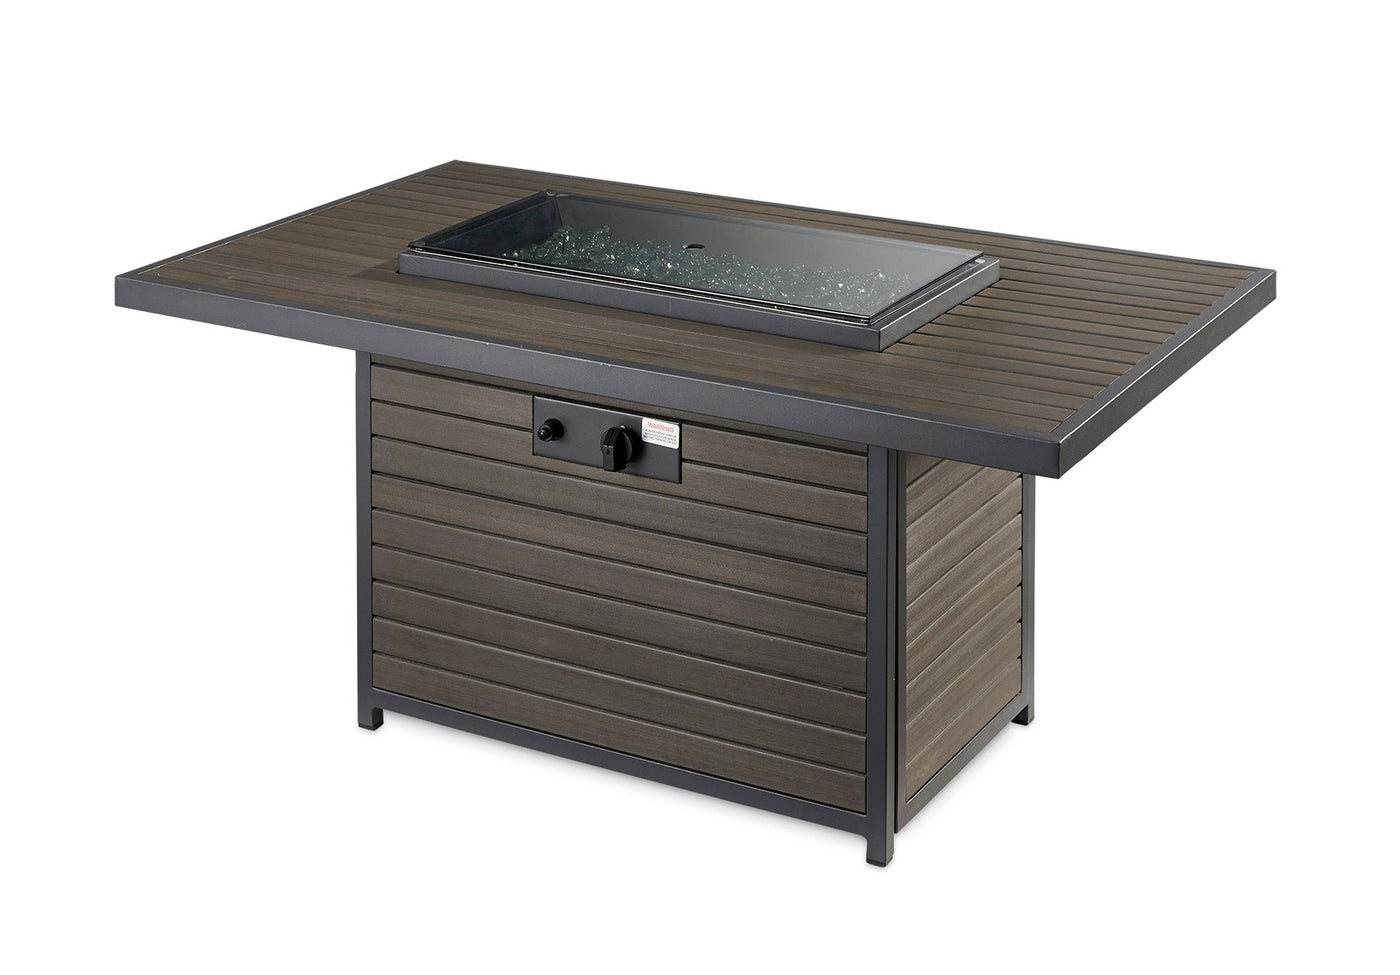 The Outdoor GreatRoom Company Brooks Rectangular Gas Fire Pit Table